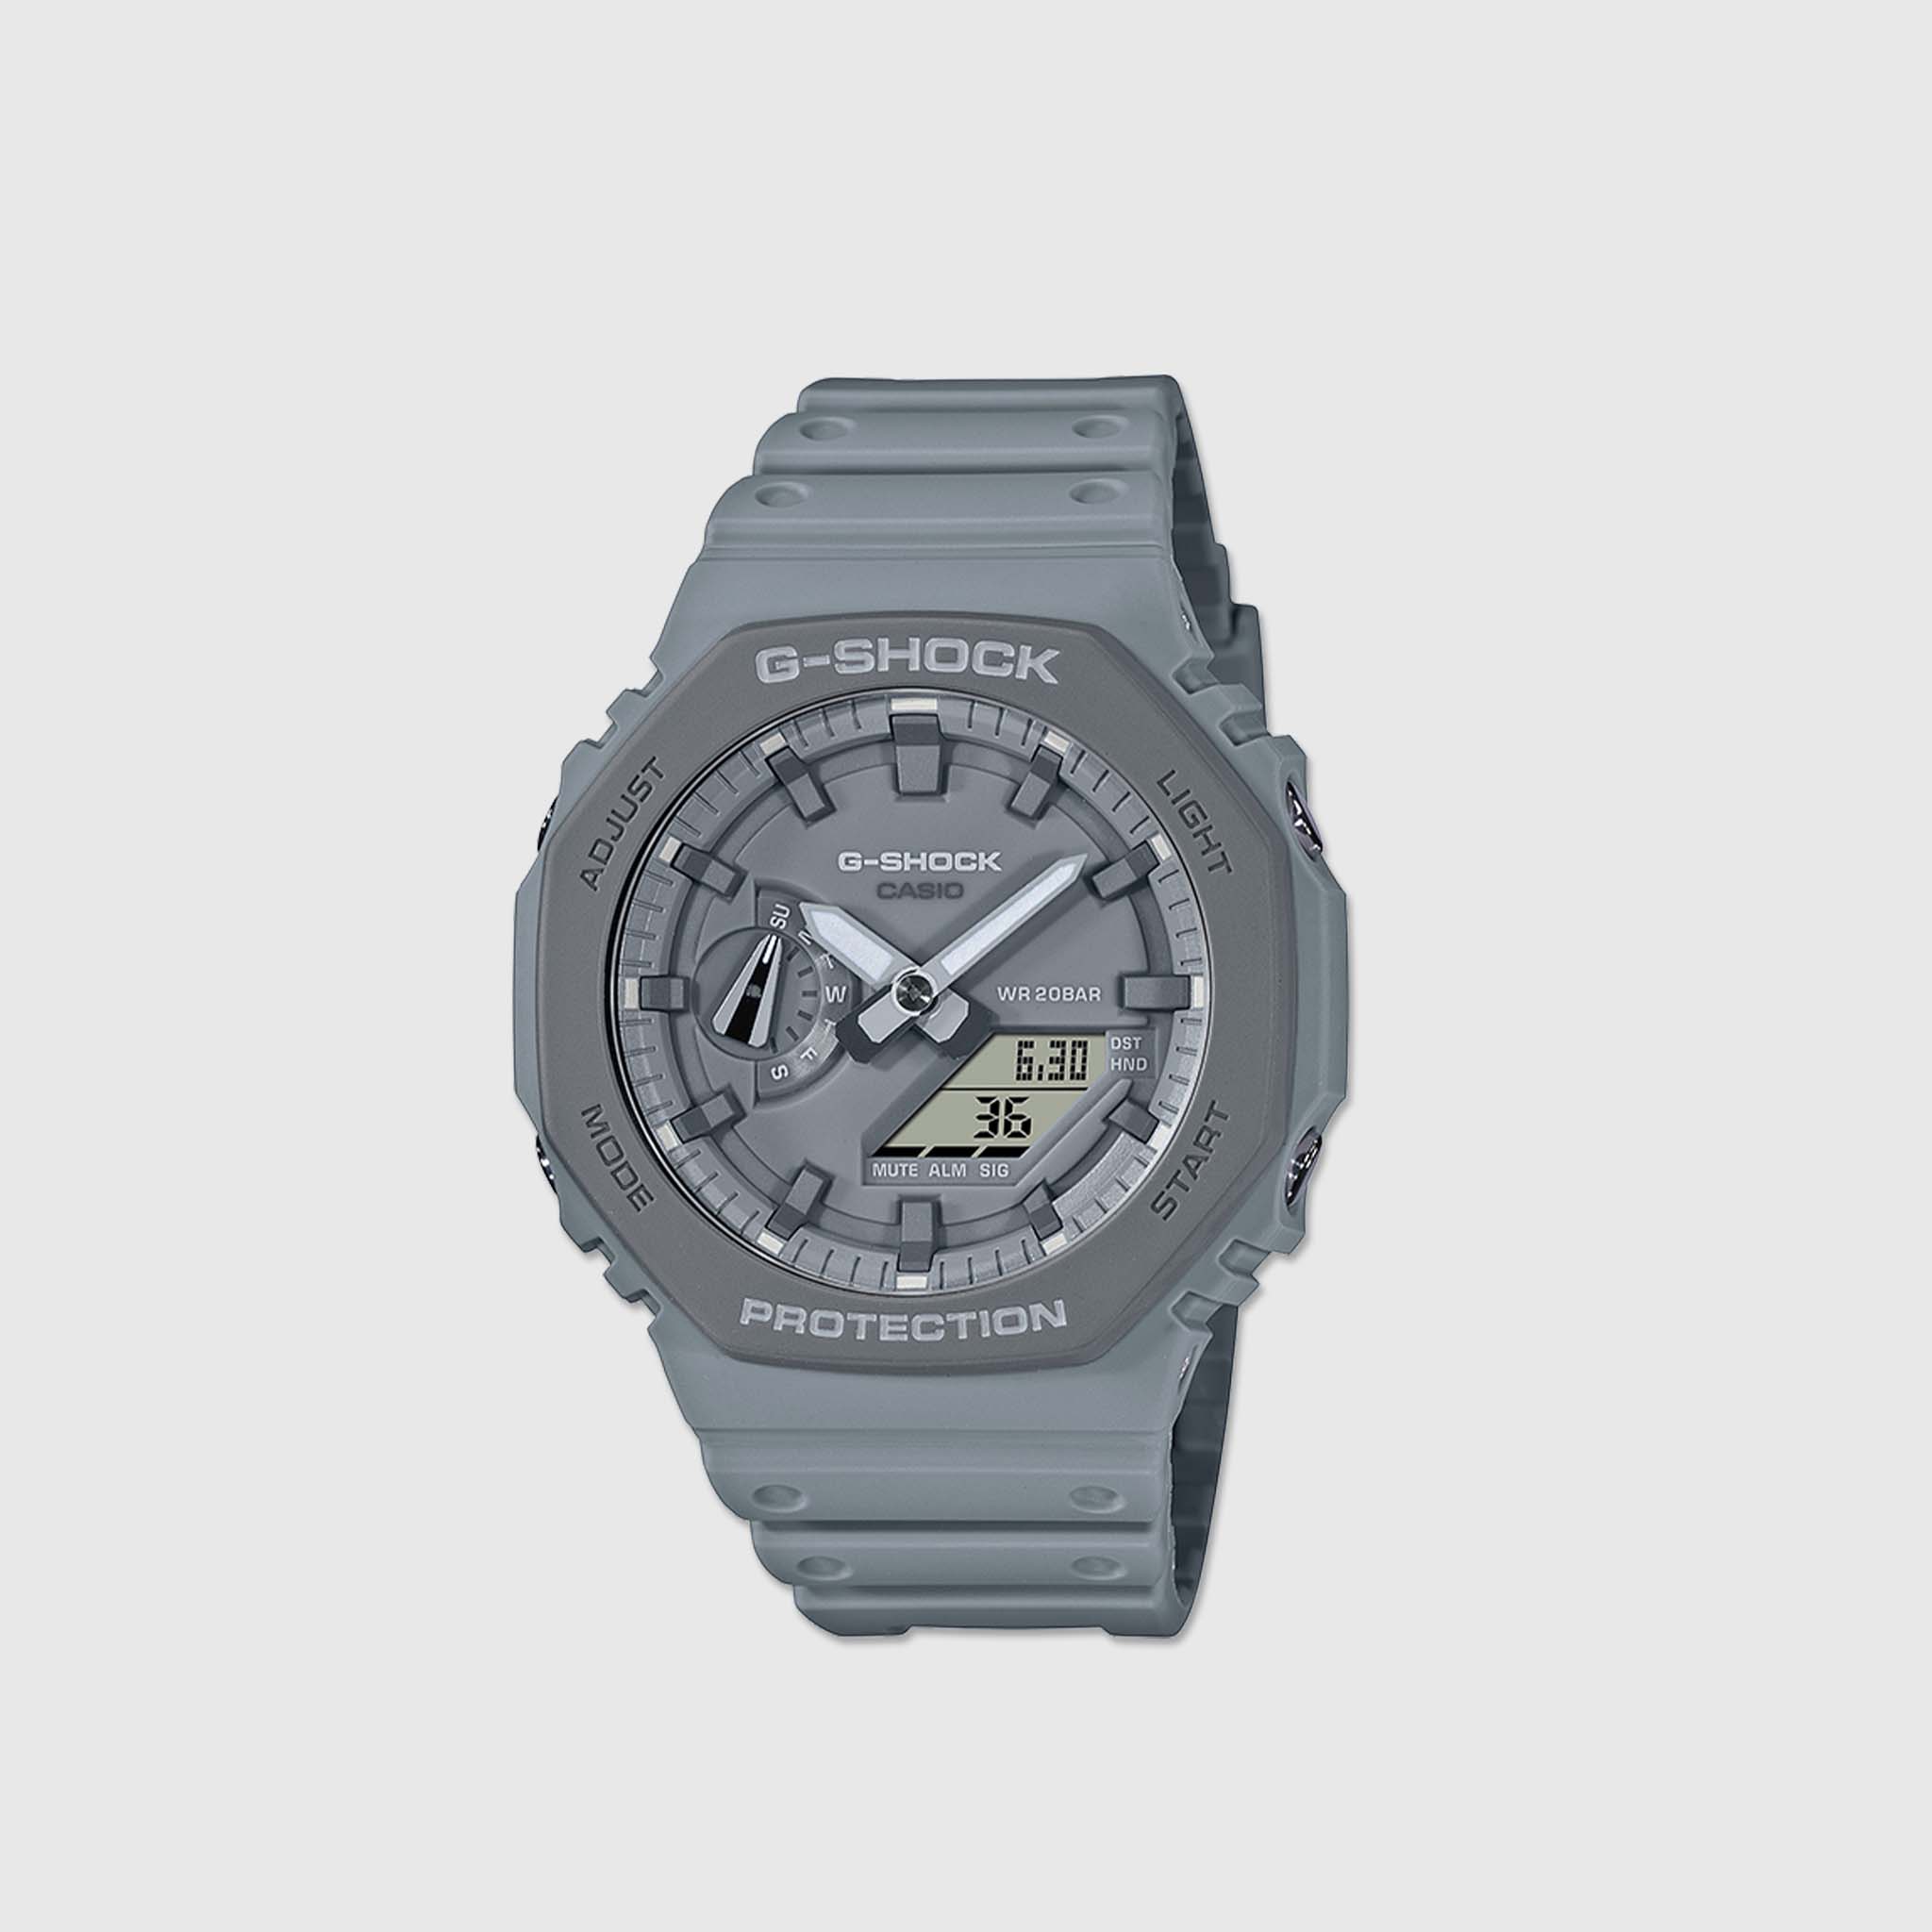 CASIO: G SHOCK  Carbon Resin Analog-Digital  Watch
Name of Bracelet: Grey Resin
Clasp: Tang Buckle
Dial Color: Grey